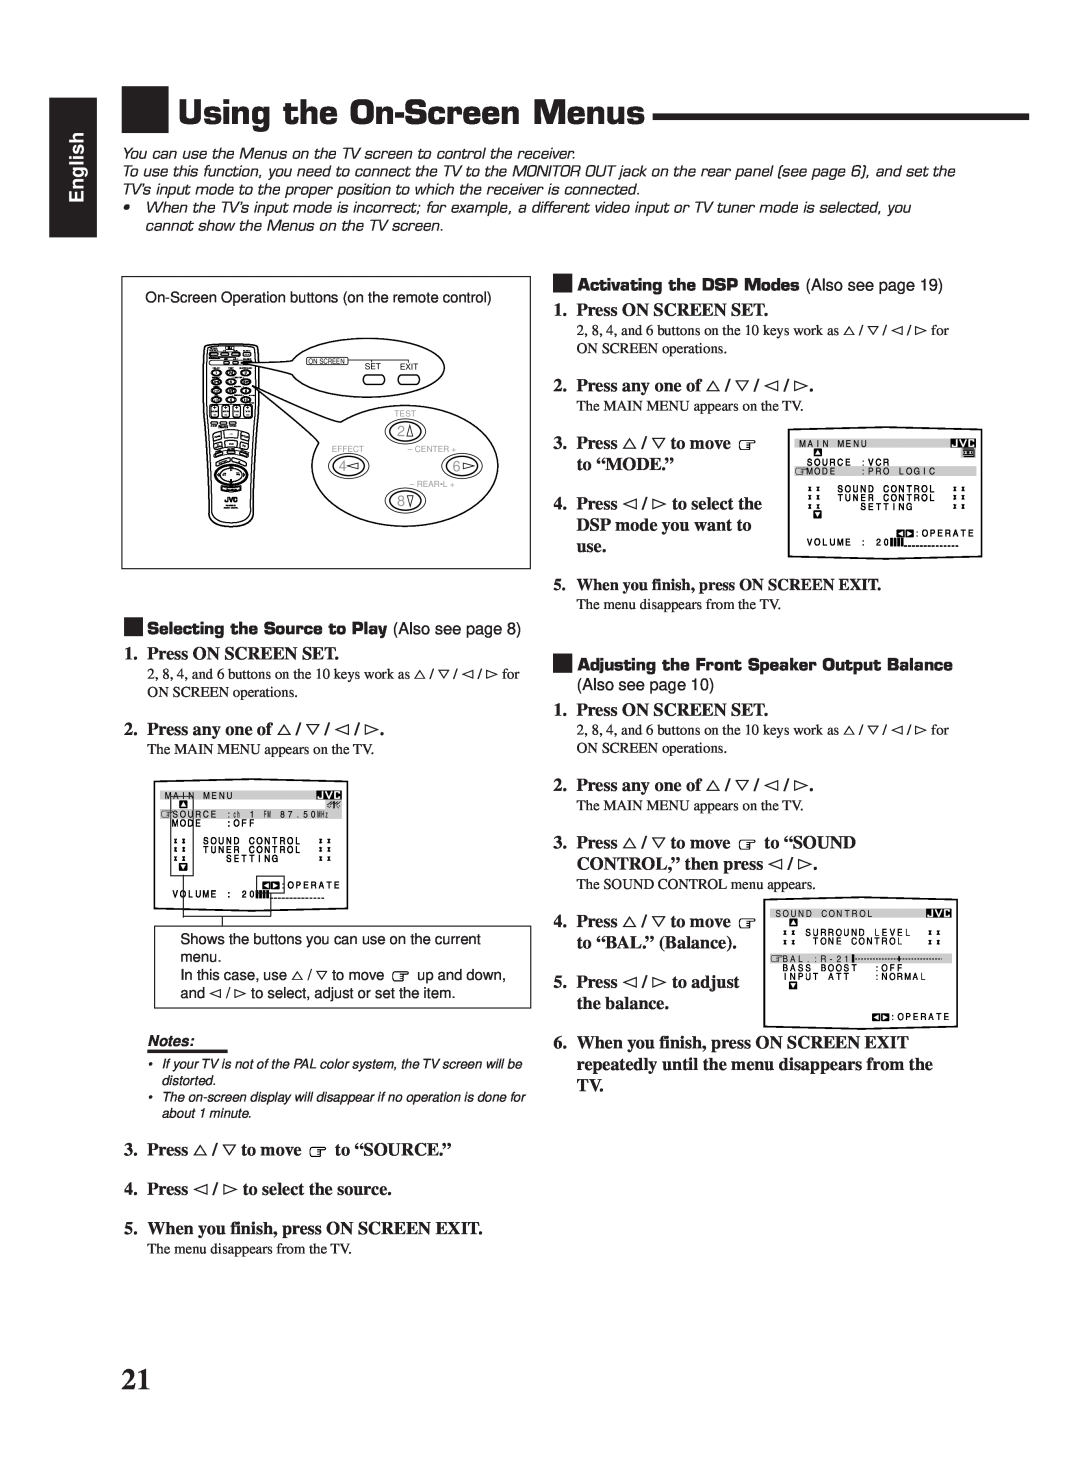 JVC LVT0142-006A, RX-669PGD manual Using the On-ScreenMenus, English, When you finish, press ON SCREEN EXIT 